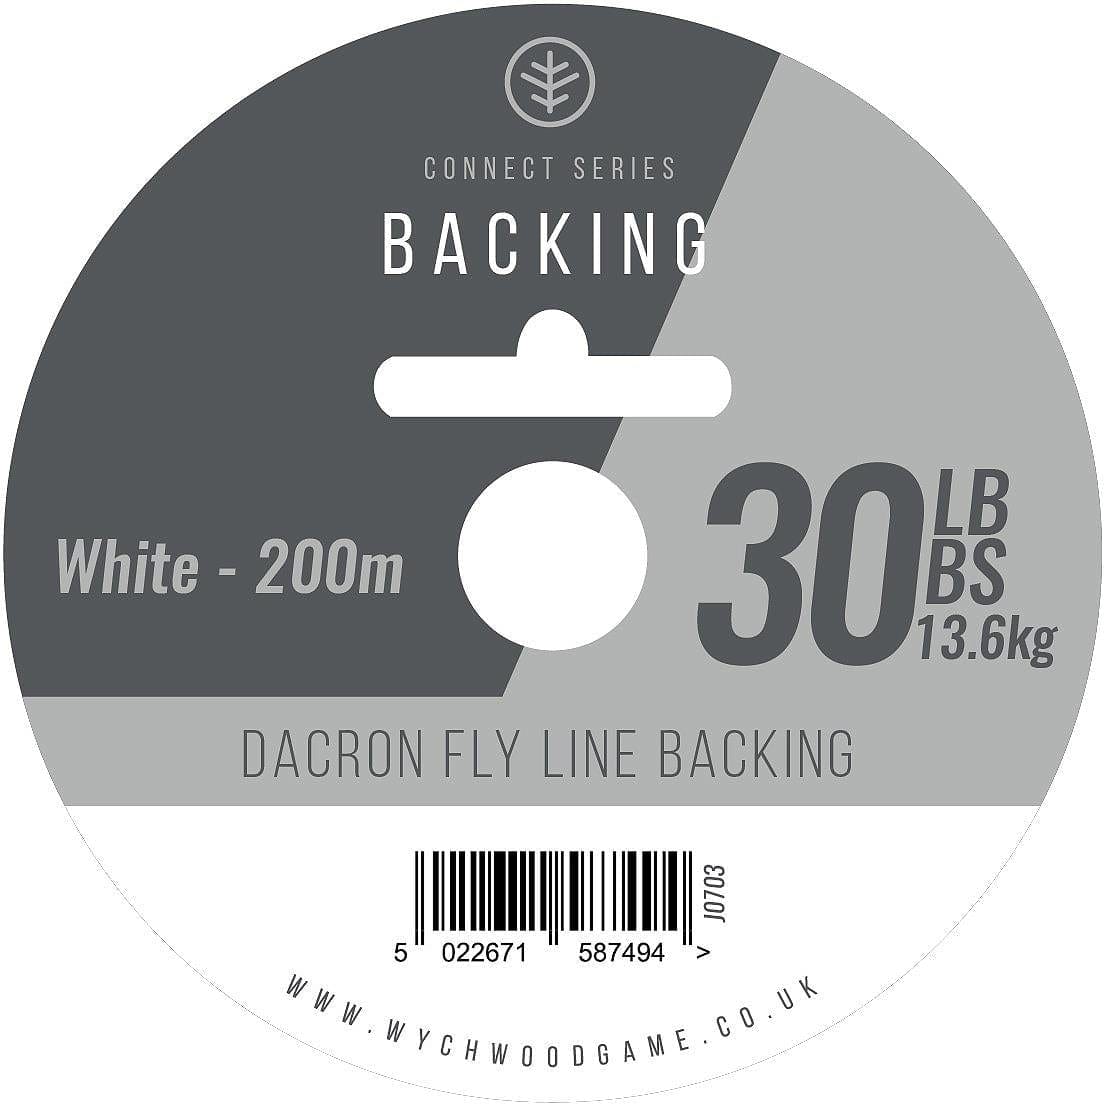 WYCHWOOD CONNECT SERIES BACKING 30LB WHITE 200M.